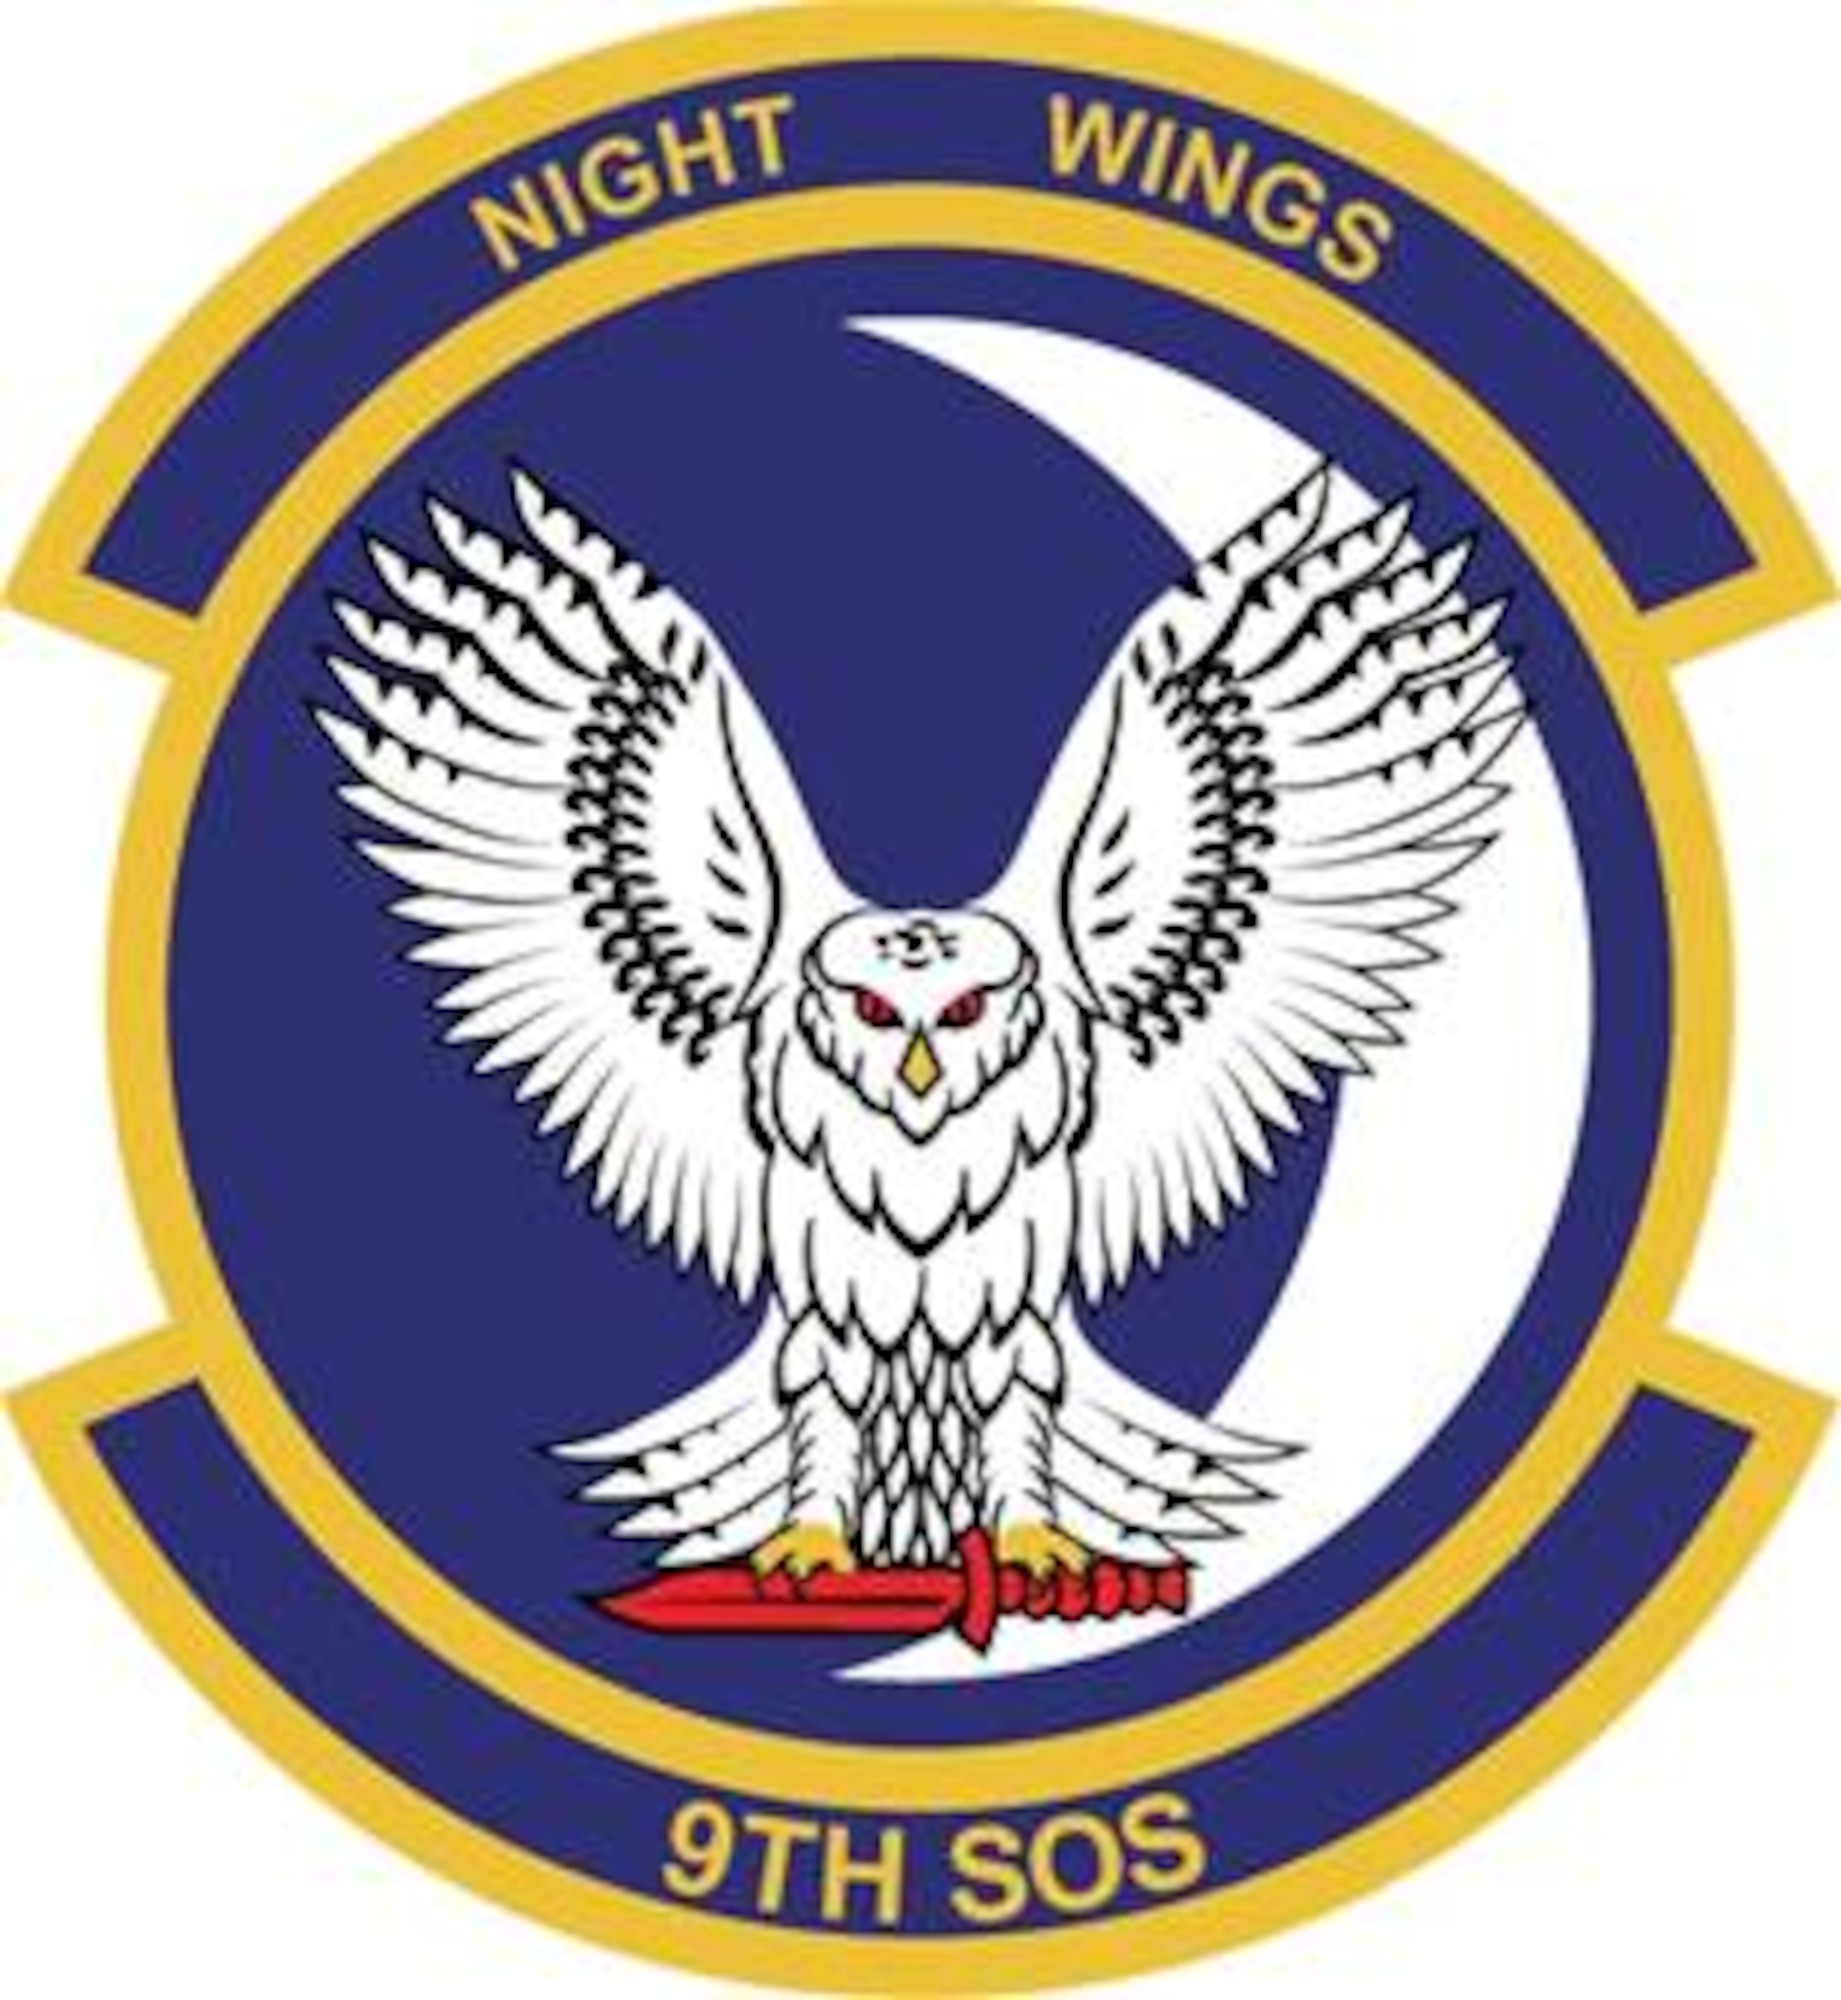 9th Special Operations Squadron emblem significance: The blue of the disc, the crescent moon, and the night sky represent the unit's primary theater of operations.
Yellow signifies the sun and the excellence required of Air Force personnel.
The owl is symbolic of the unit's aircraft and its ability to operate in the night low-level flight regime. The wisdom associated with the owl represents the knowledge and expertise each squadron member possesses to perform the mission.
The commando knife clutched by the owl in its talons represents the special operations legacy with which the unit has been entrusted.